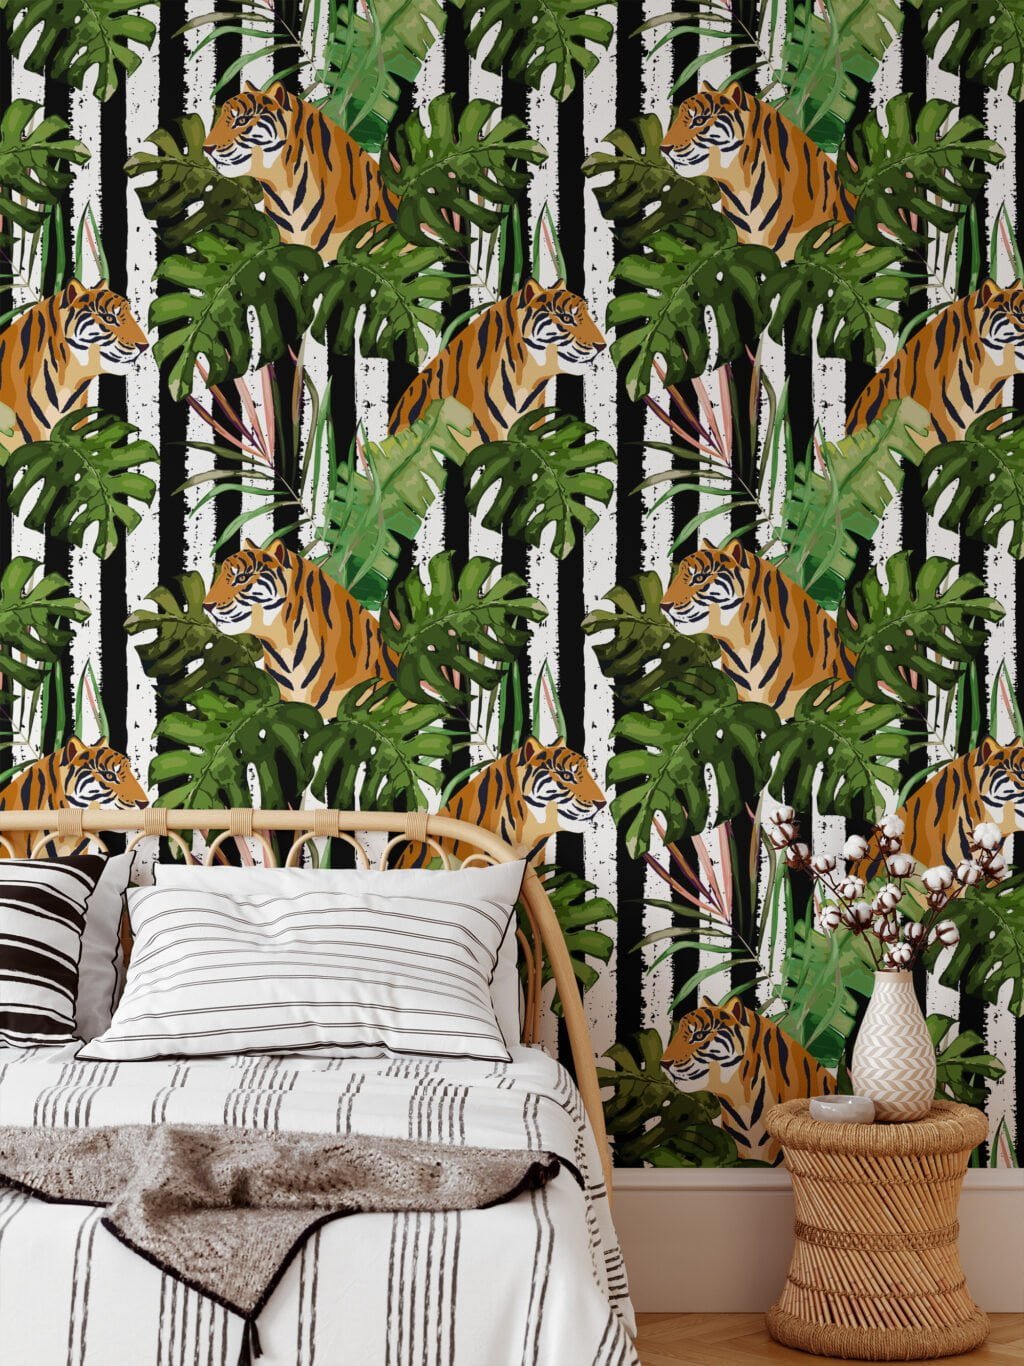 Tiger Illustration With Tropical Monstera Leaves Wallpaper, Majestic Tiger in Jungle Peel & Stick Wall Mural